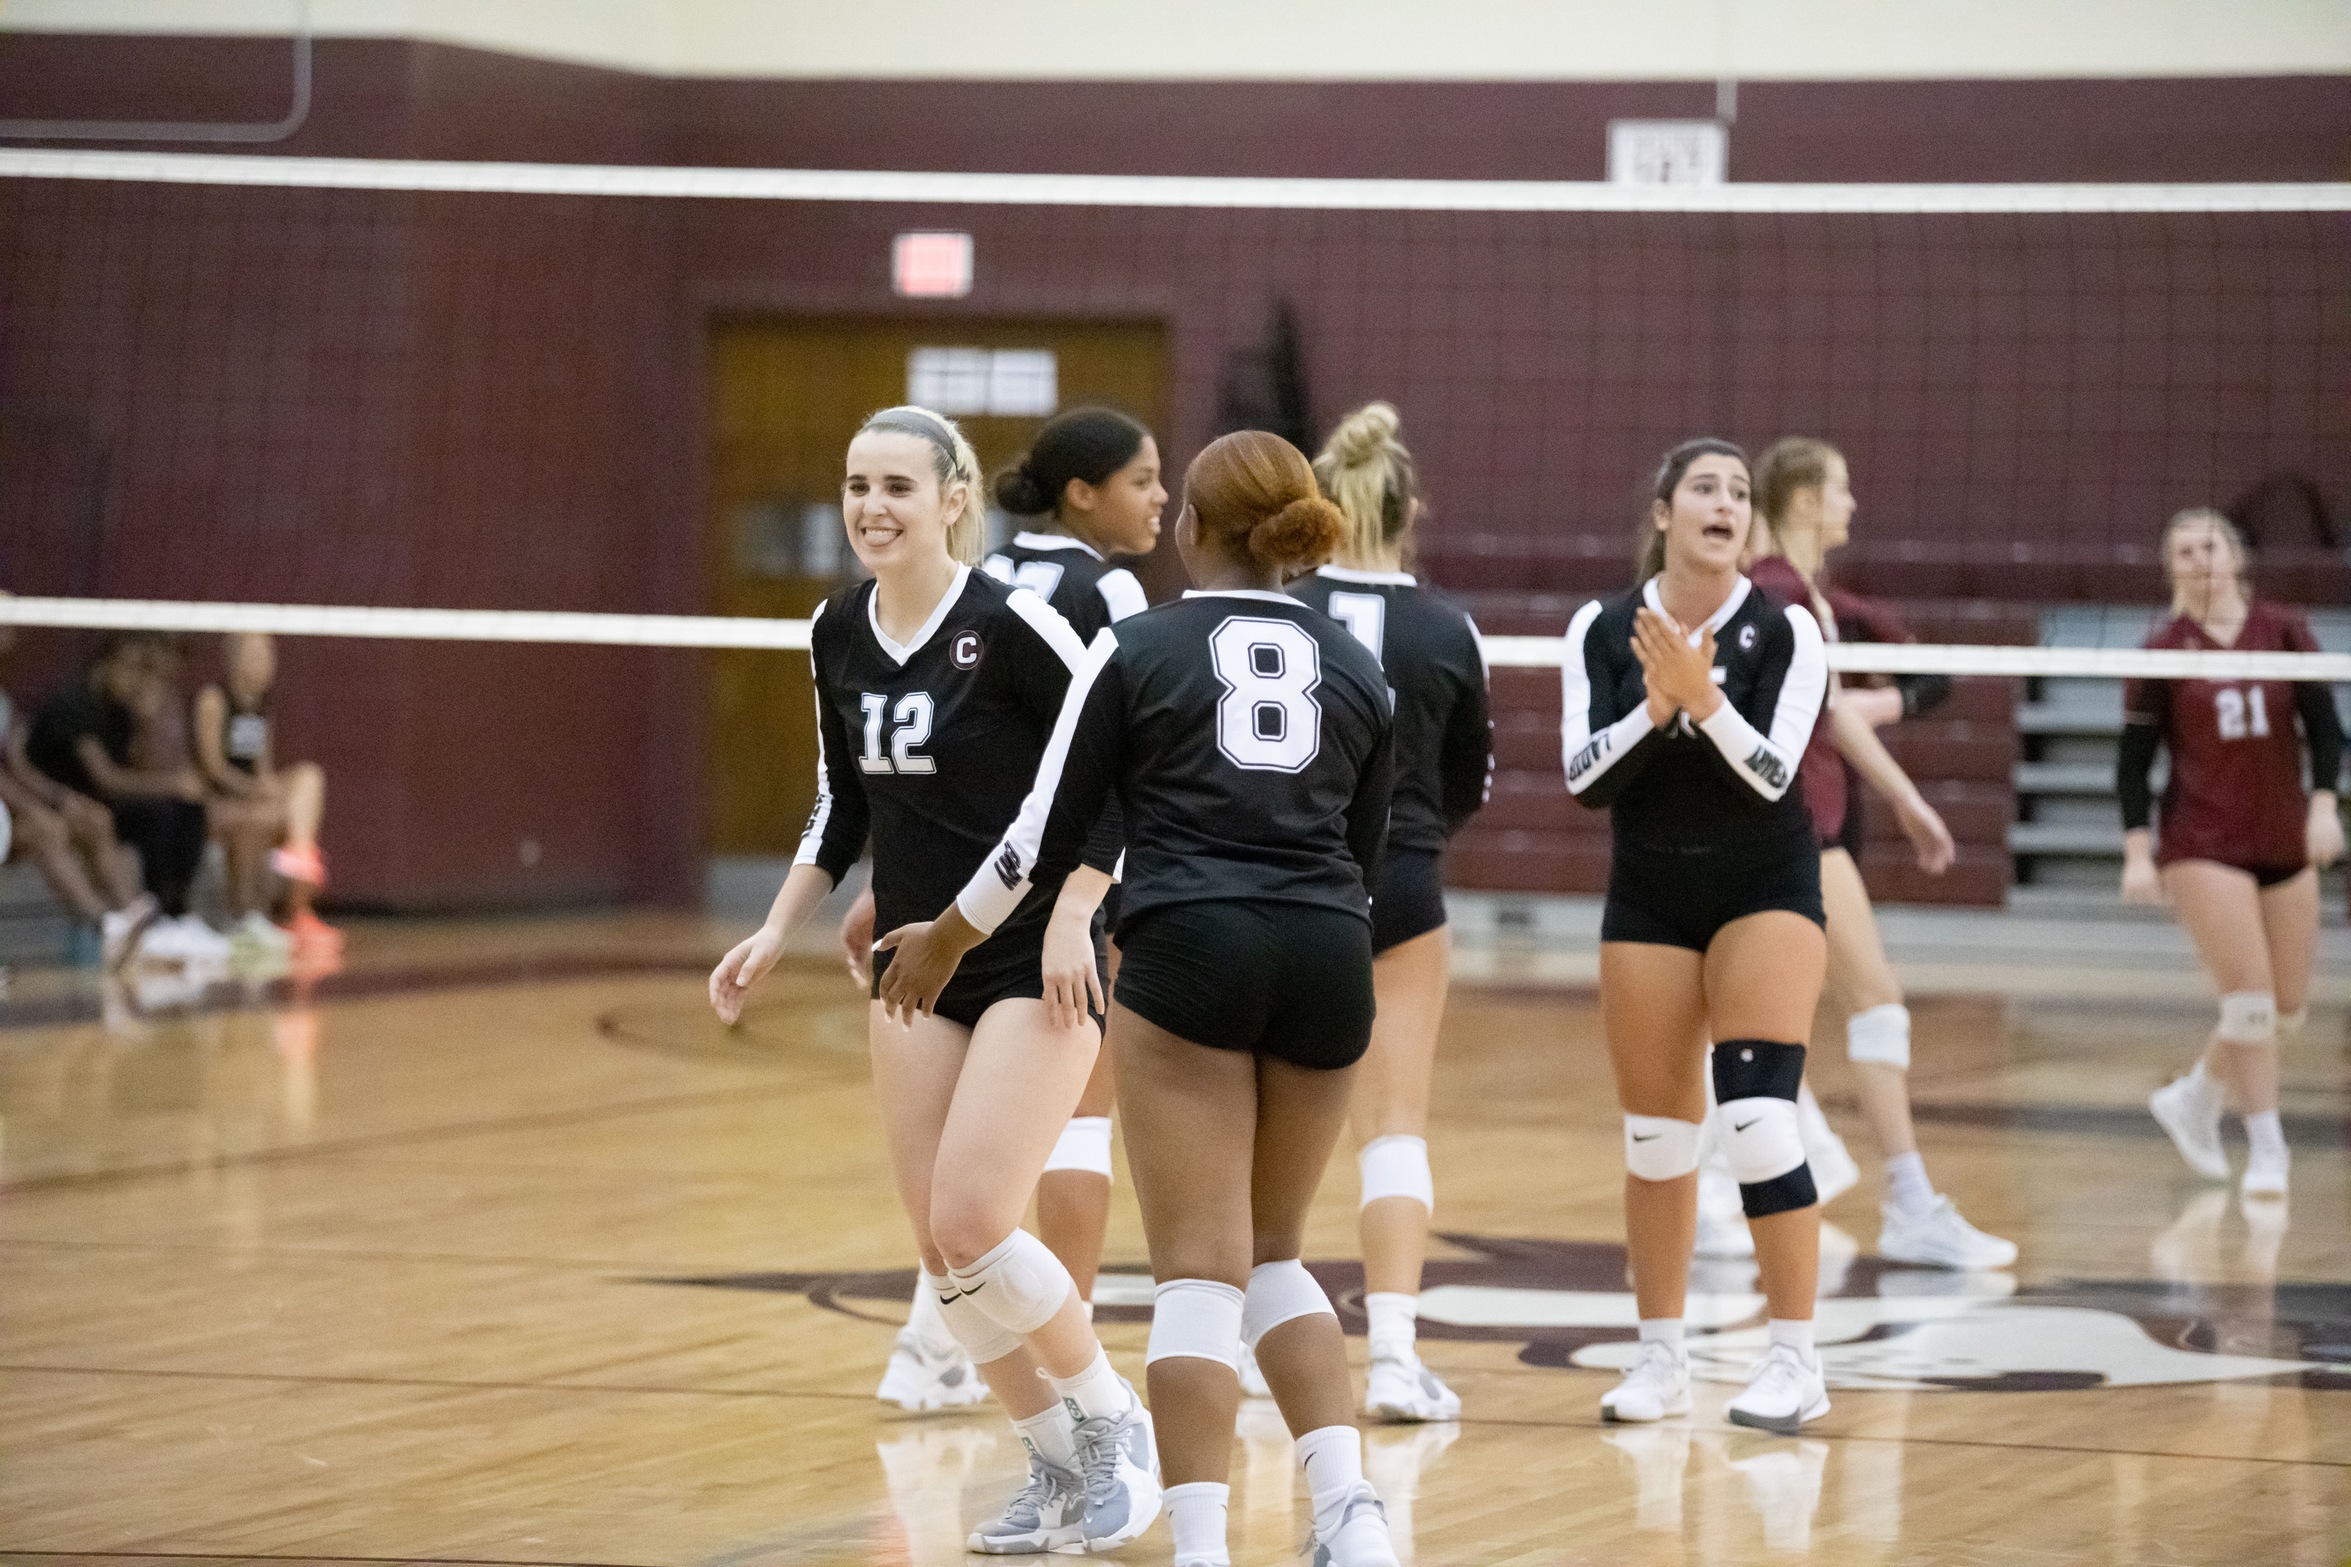 The Ladies bested Wiley College 3-2 on Wednesday evening.